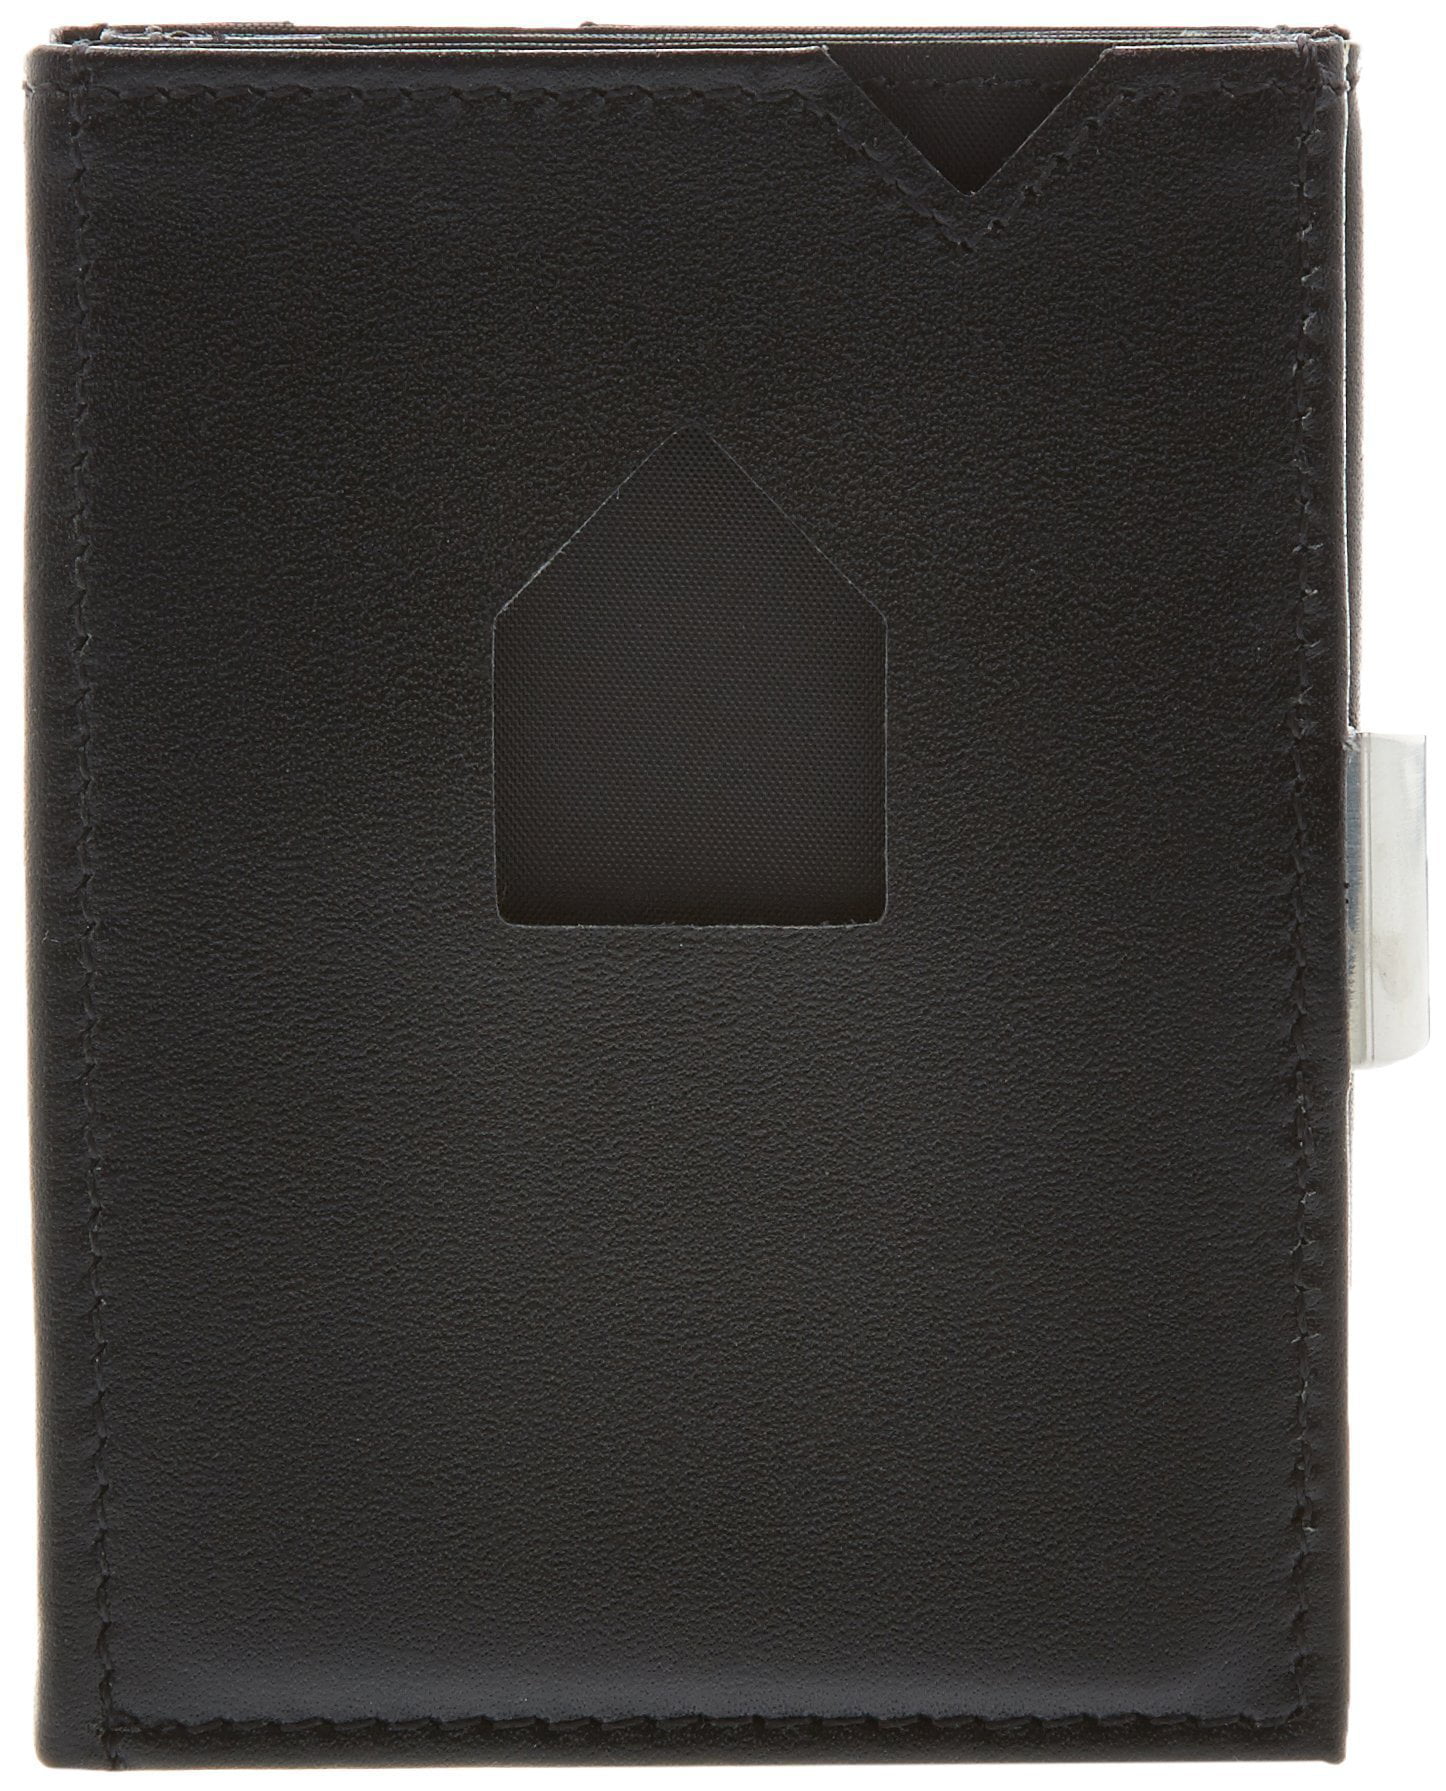 Premium RFID Blocking Trifold Leather Wallet with Stainless Steel Locking Clip EXENTRI Wallet in Black